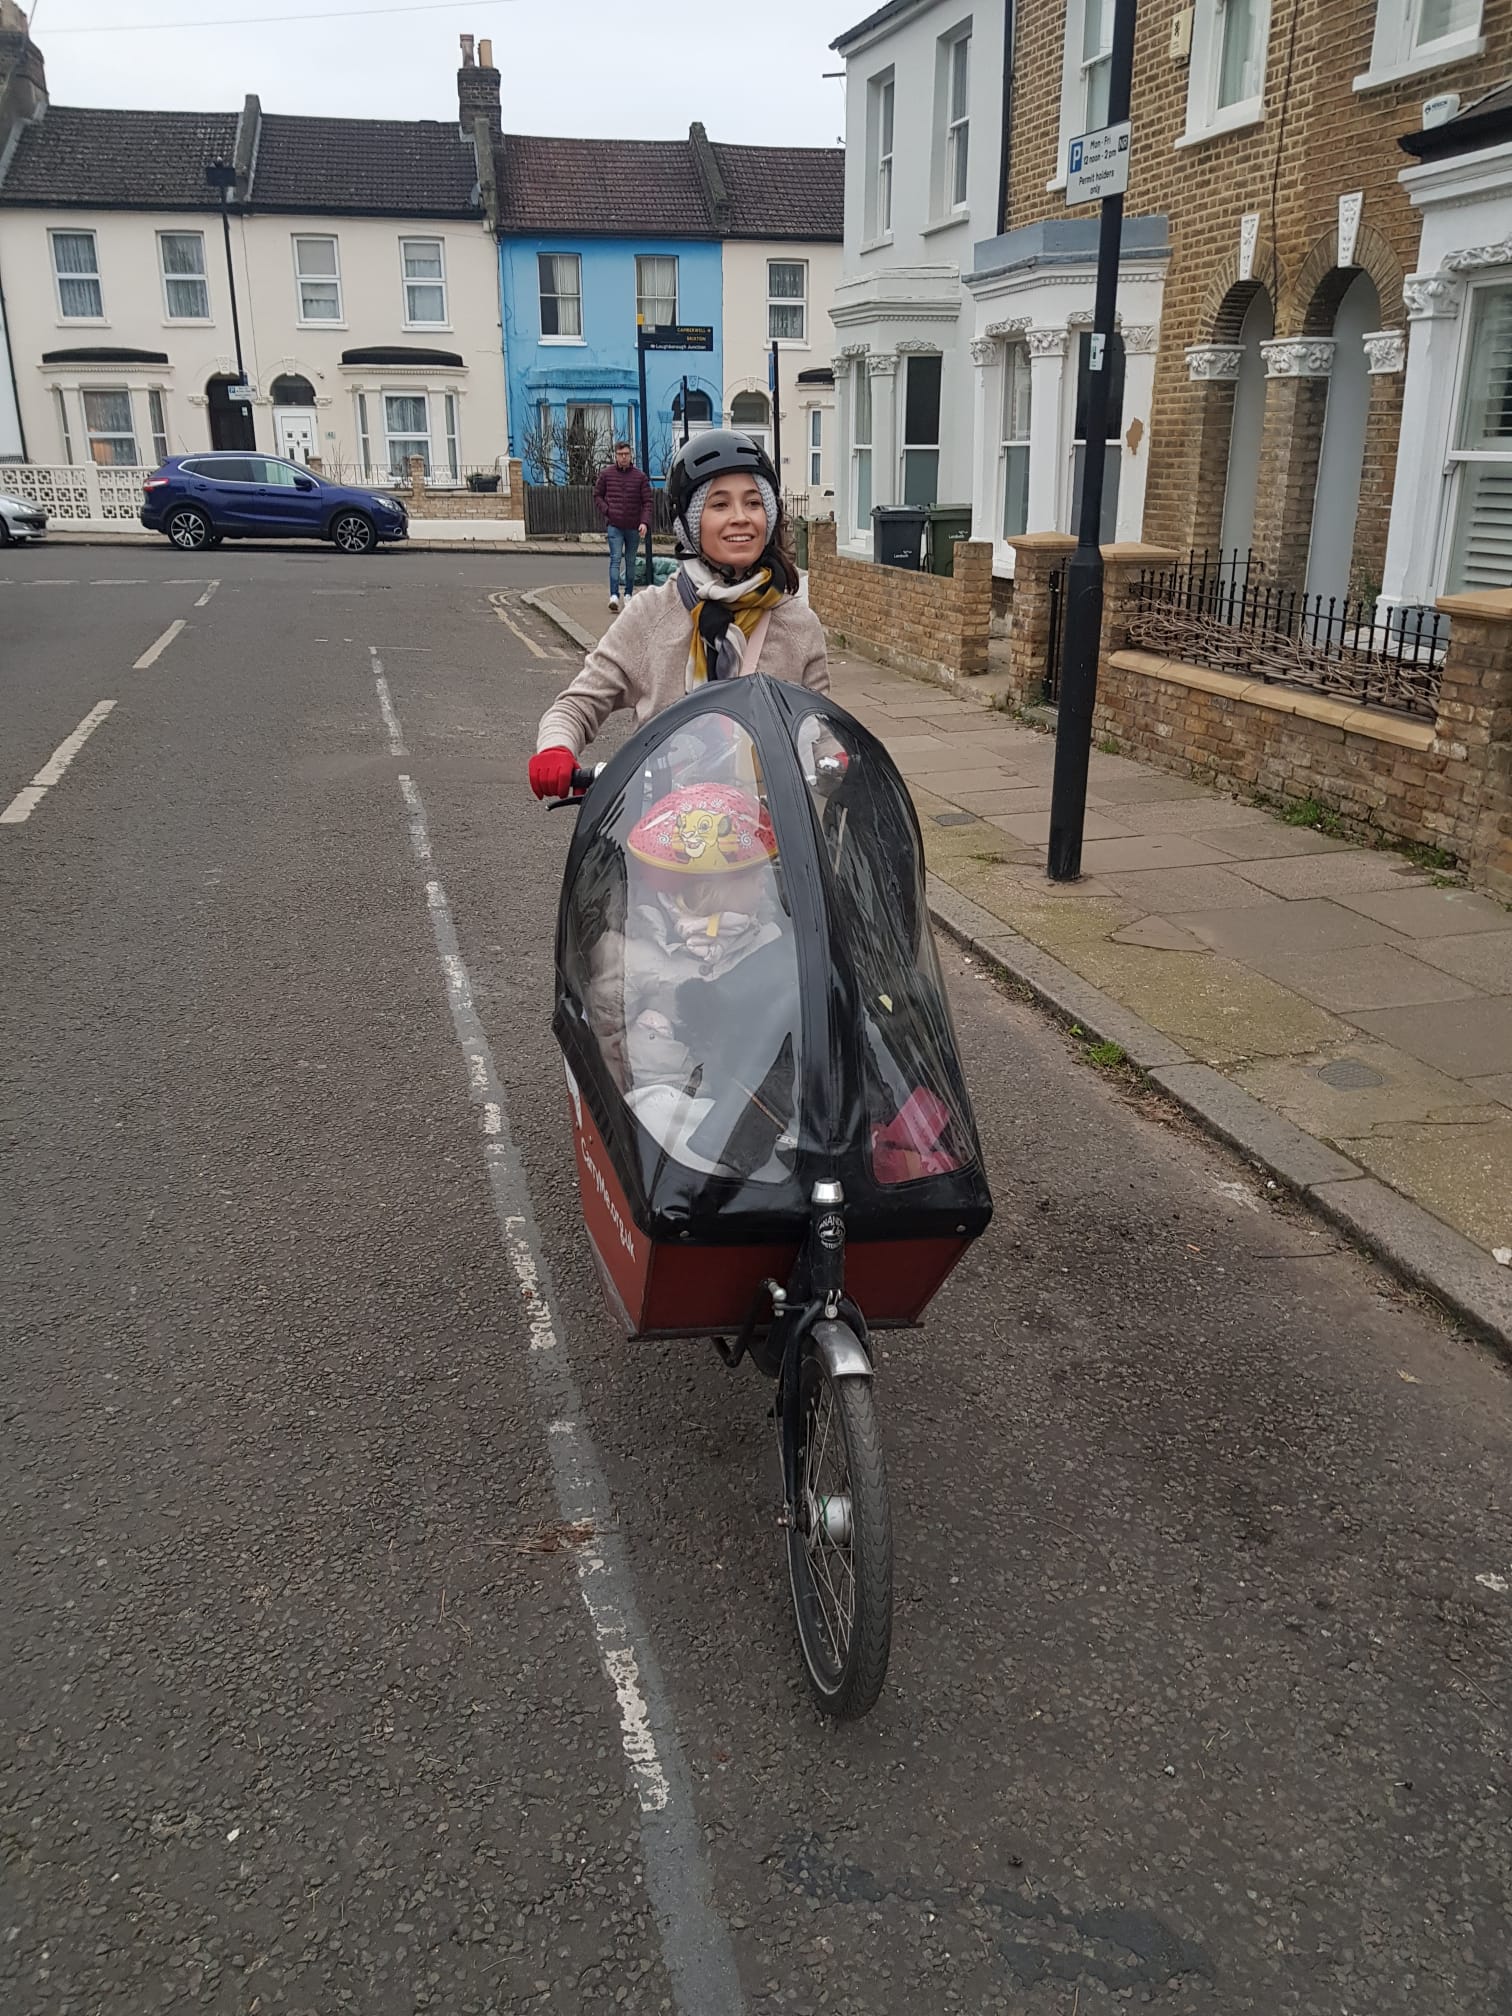 Julie Hermann keeping her daughter dry when cycling in the cargo bike!